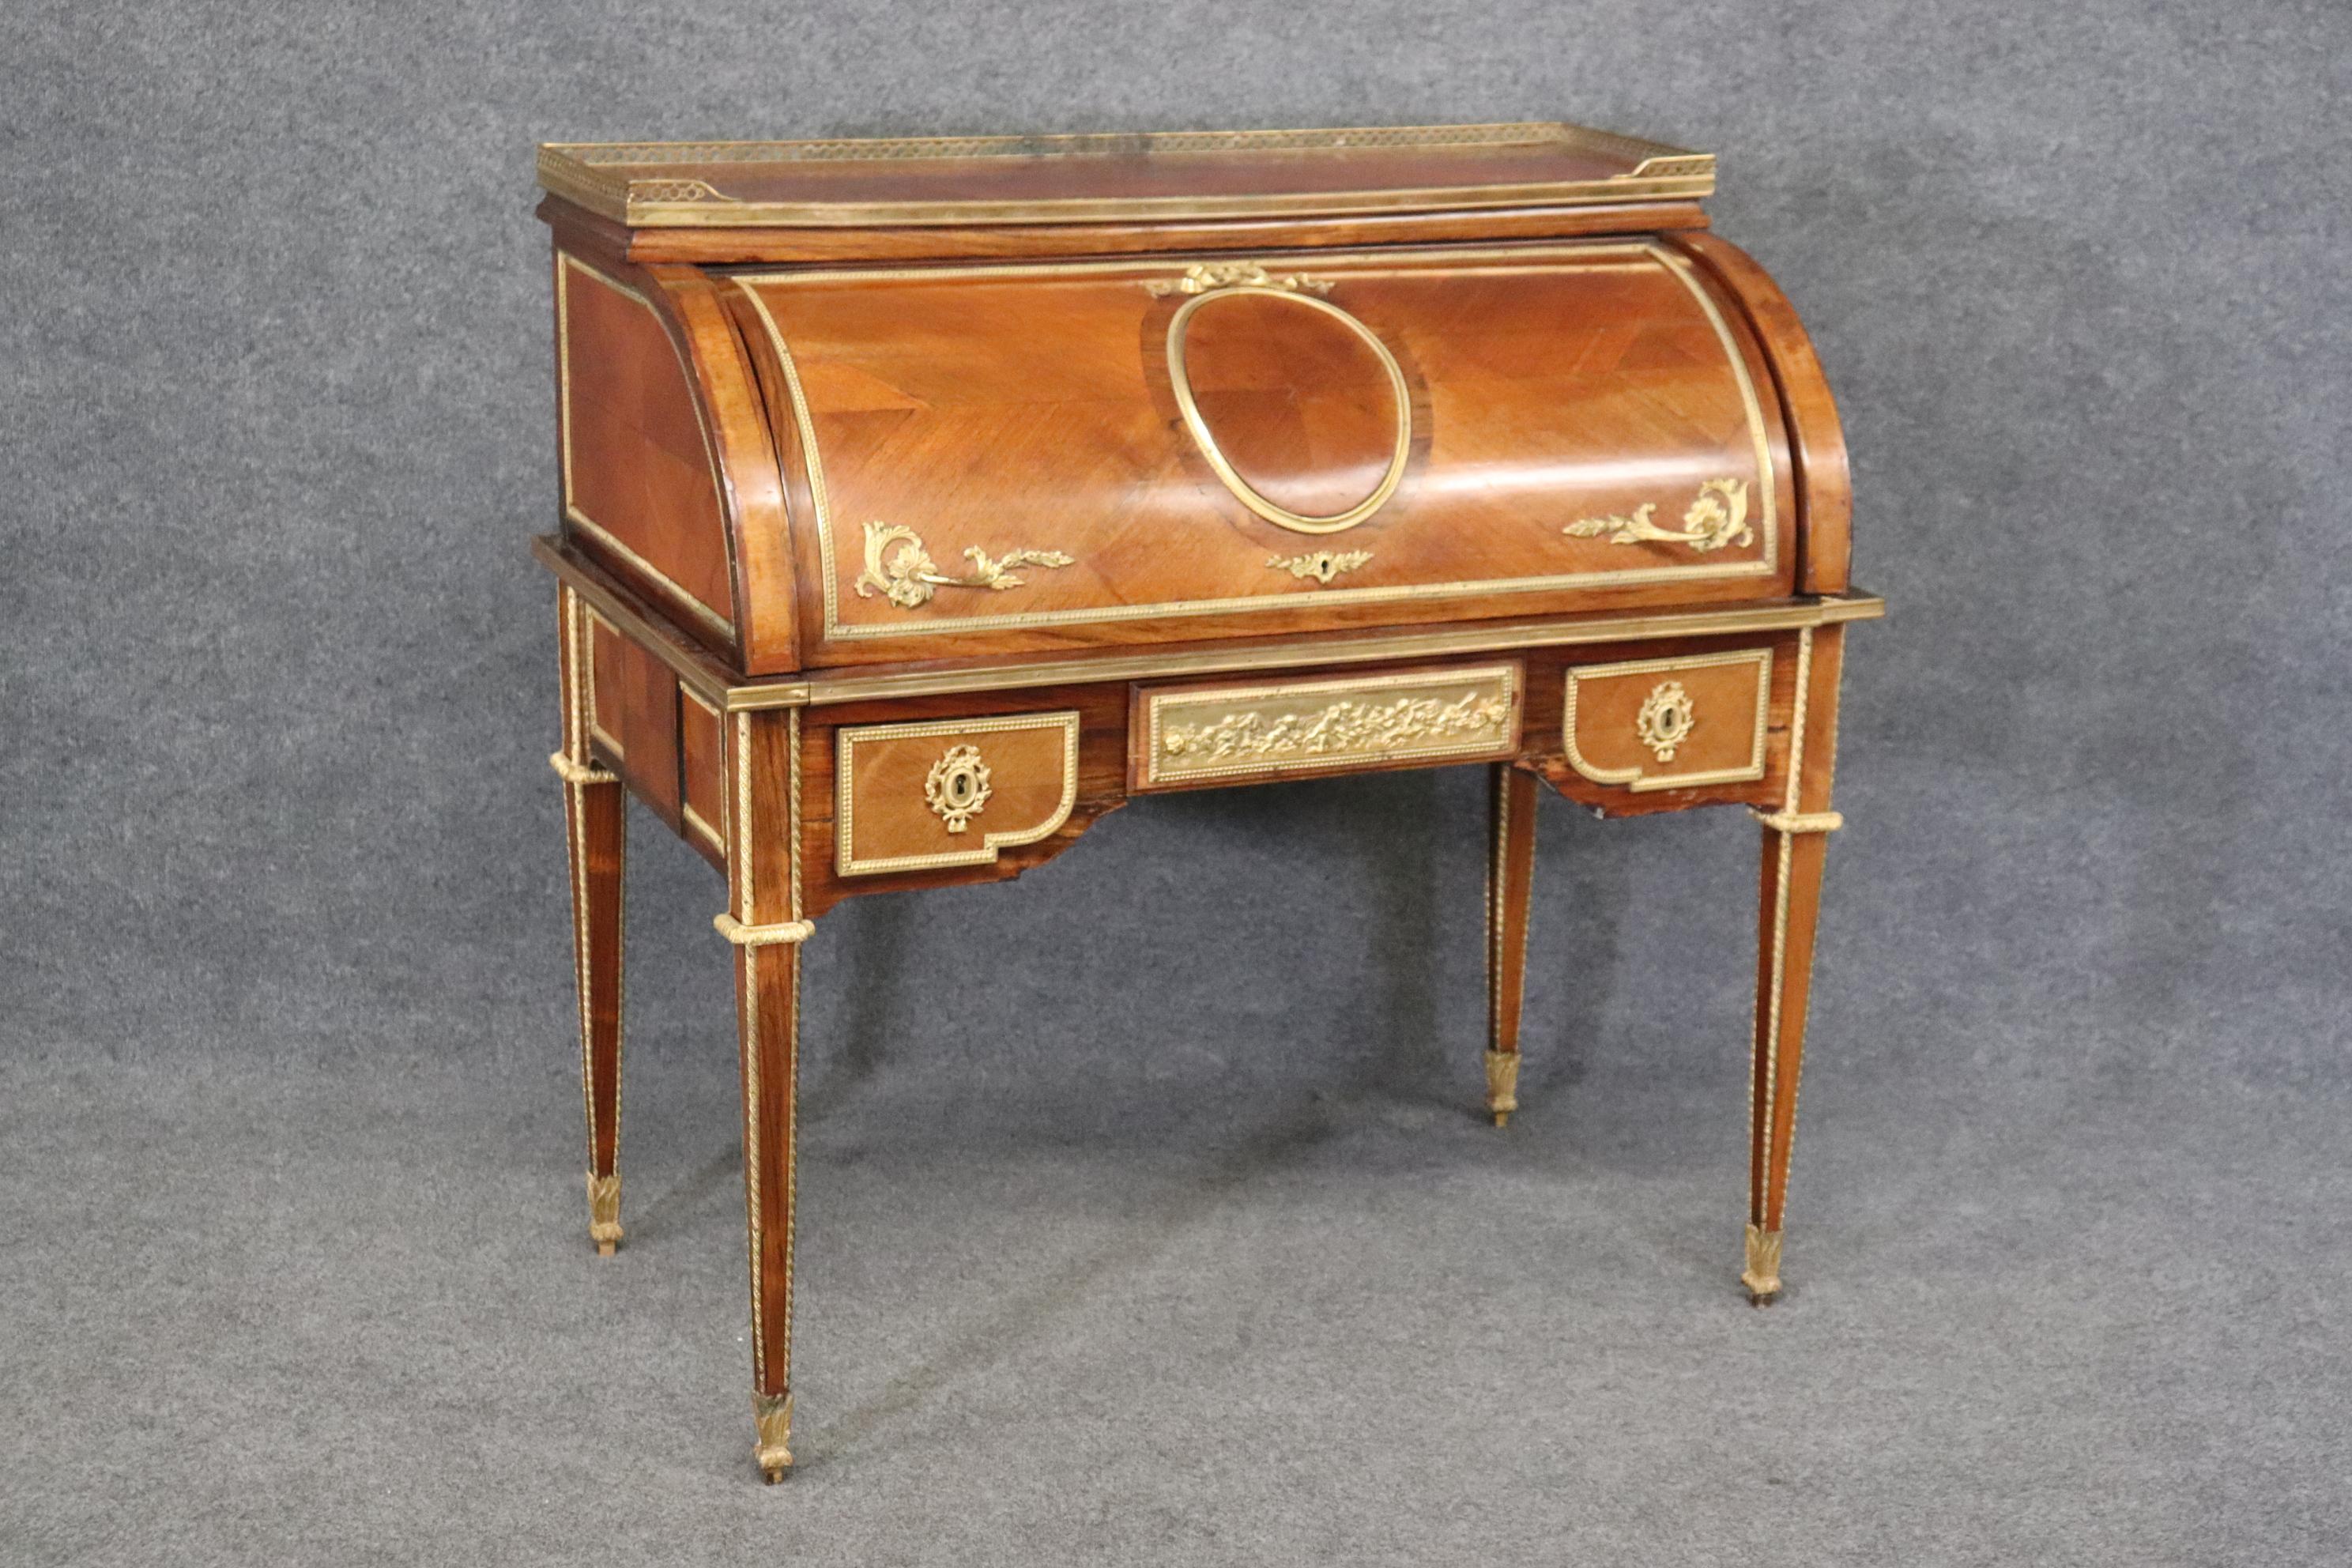 This is an absolutely stunning gold dore' bronze mounted cylinder desk with the best cherub or putti scenes and other bronze mounts that make it absolutely superb. The desk dates to the 1900s era or even earlier and is in good antique condition and